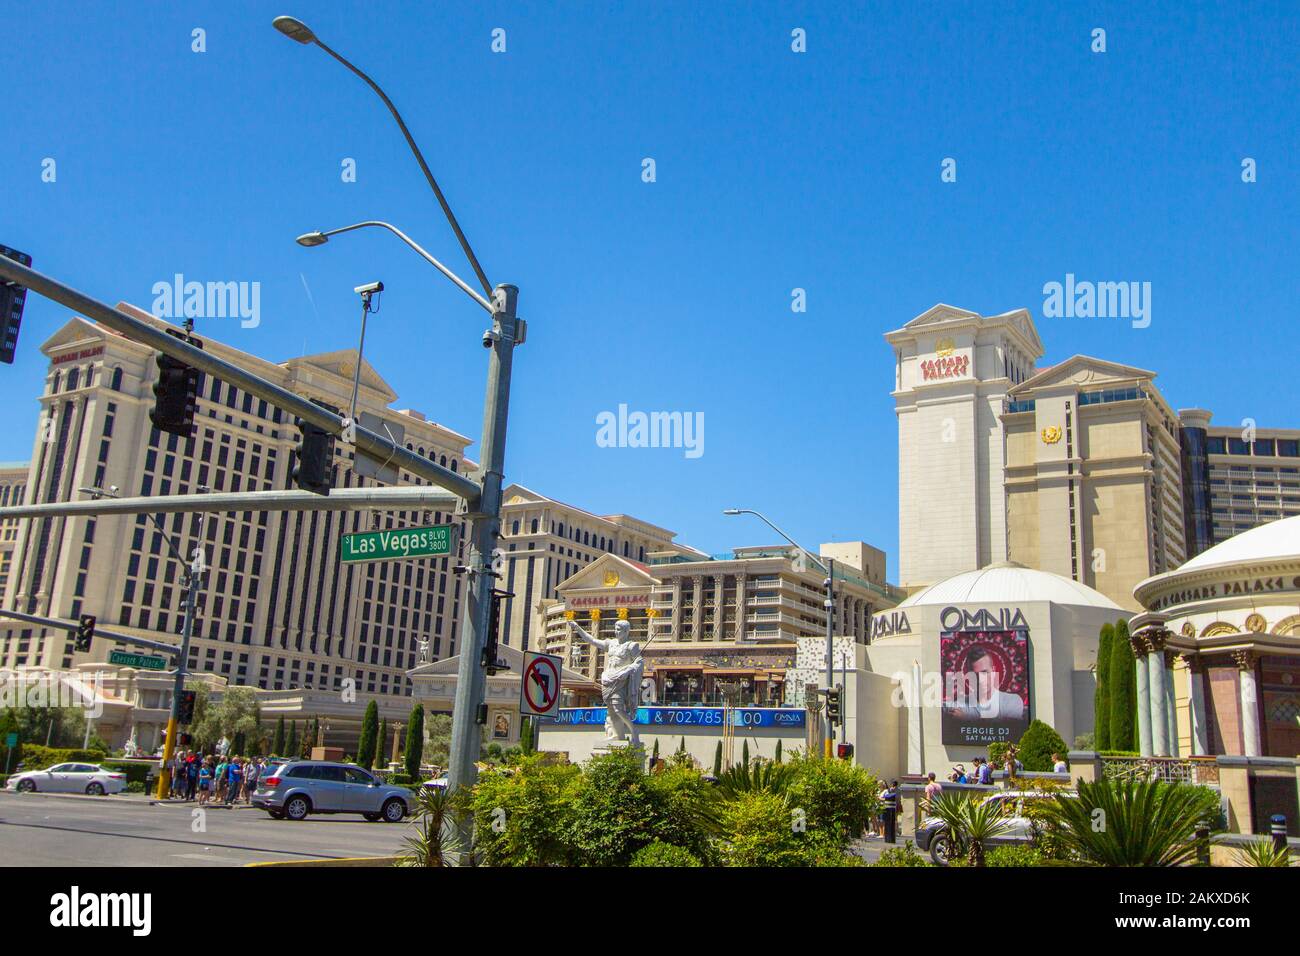 Las Vegas, Nevada, USA -  May 6, 2019: Busy intersection with road sign for the Las Vegas Boulevard. Stock Photo